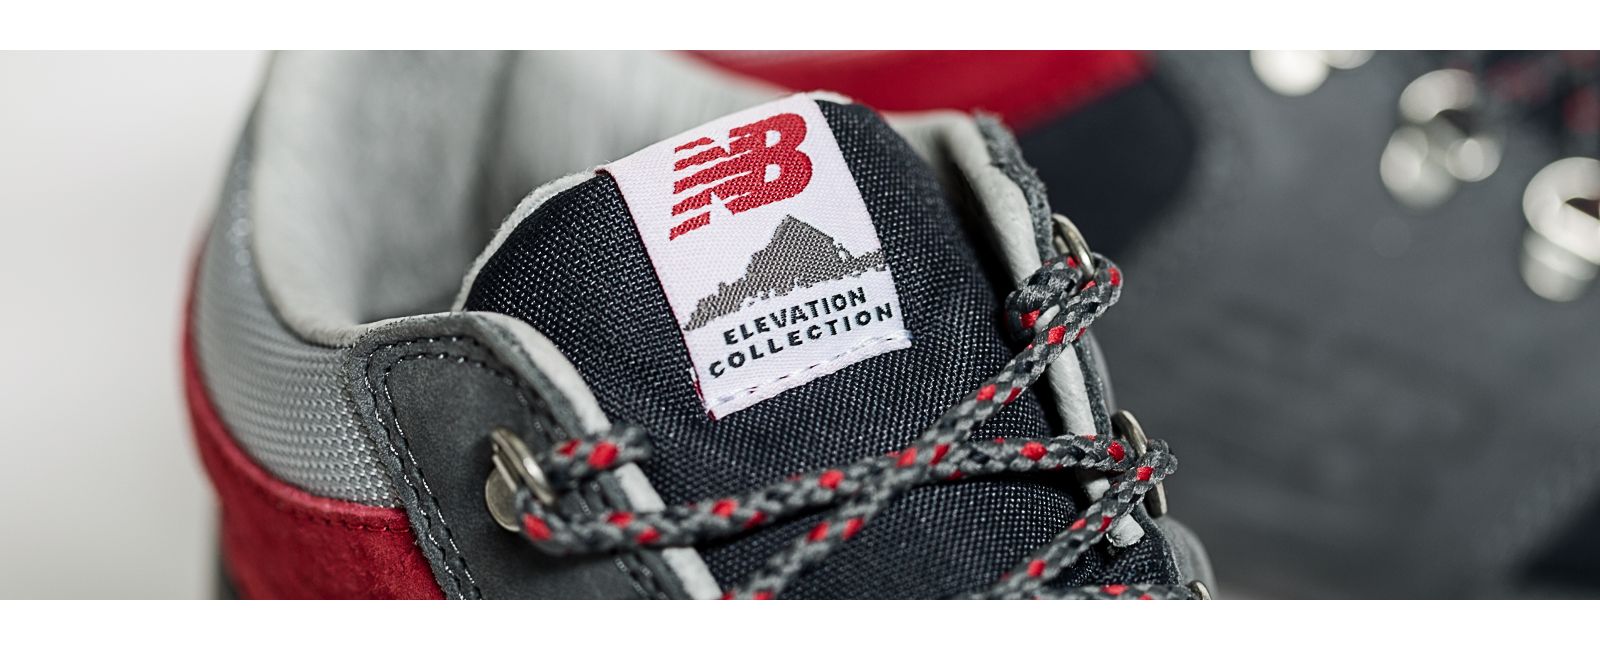 new balance elevation collection